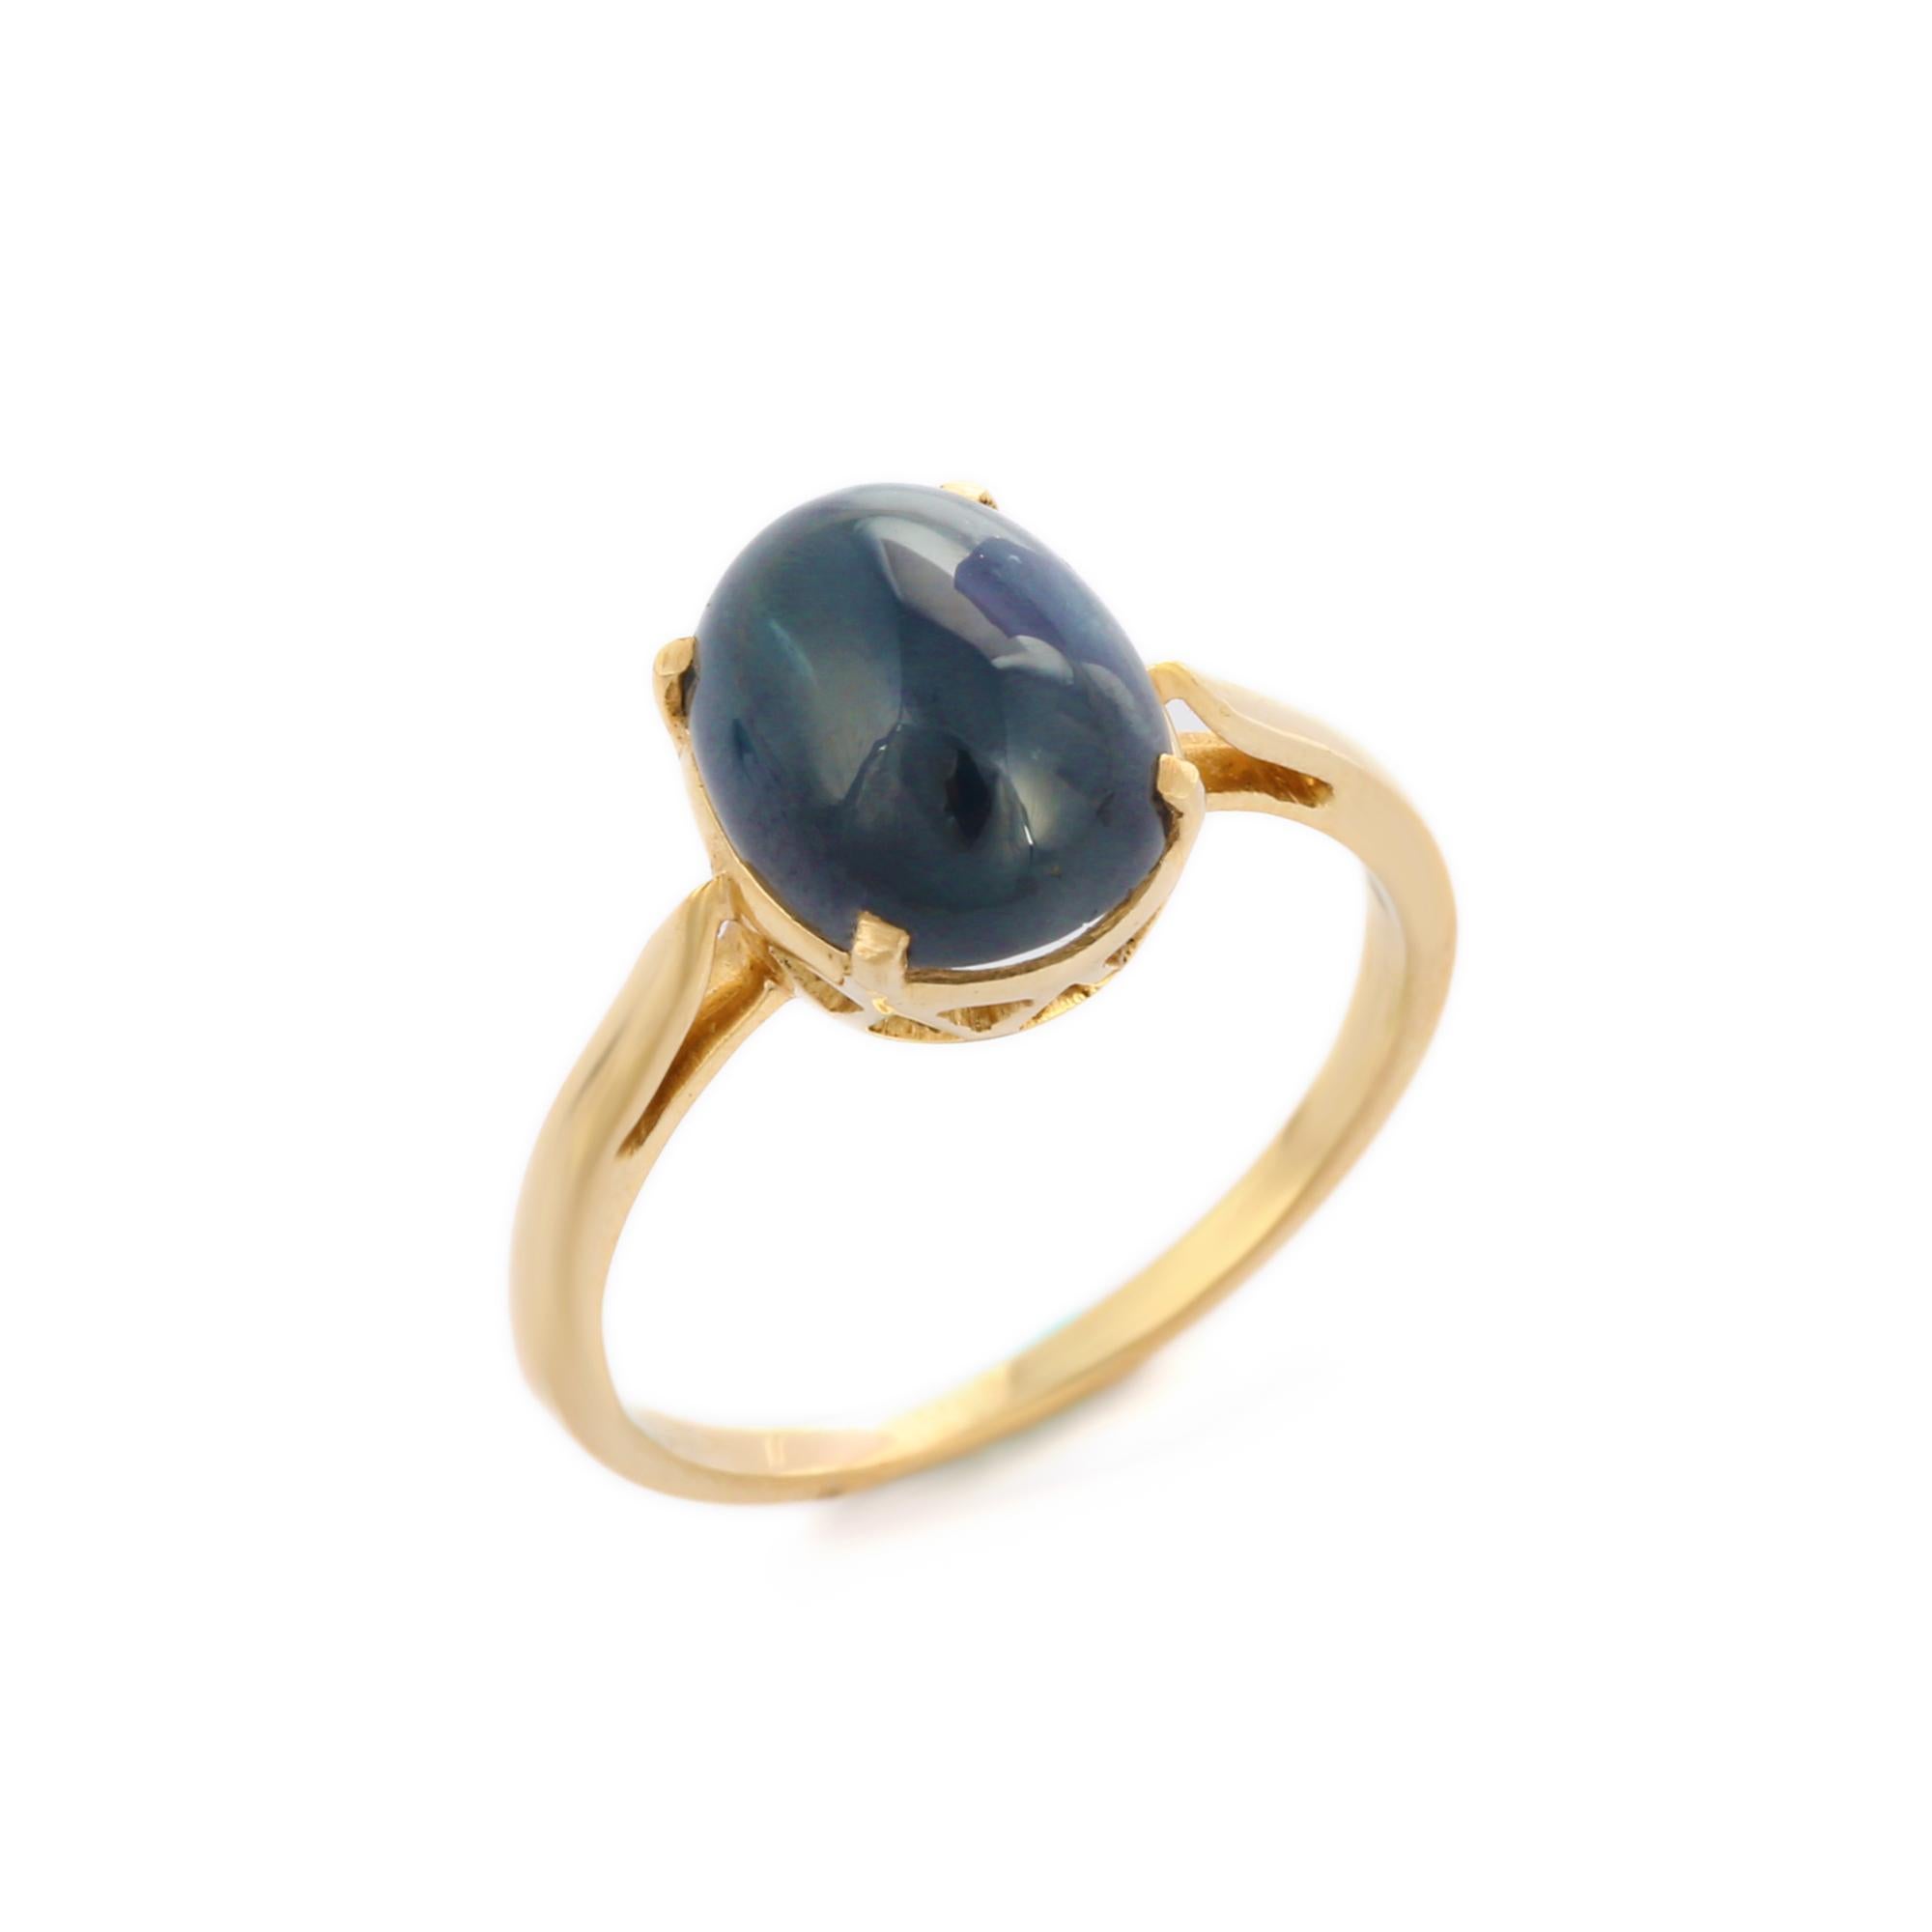 For Sale:  Anglo Indian Style 14K Yellow Gold Blue Sapphire Gemstone Ring 8